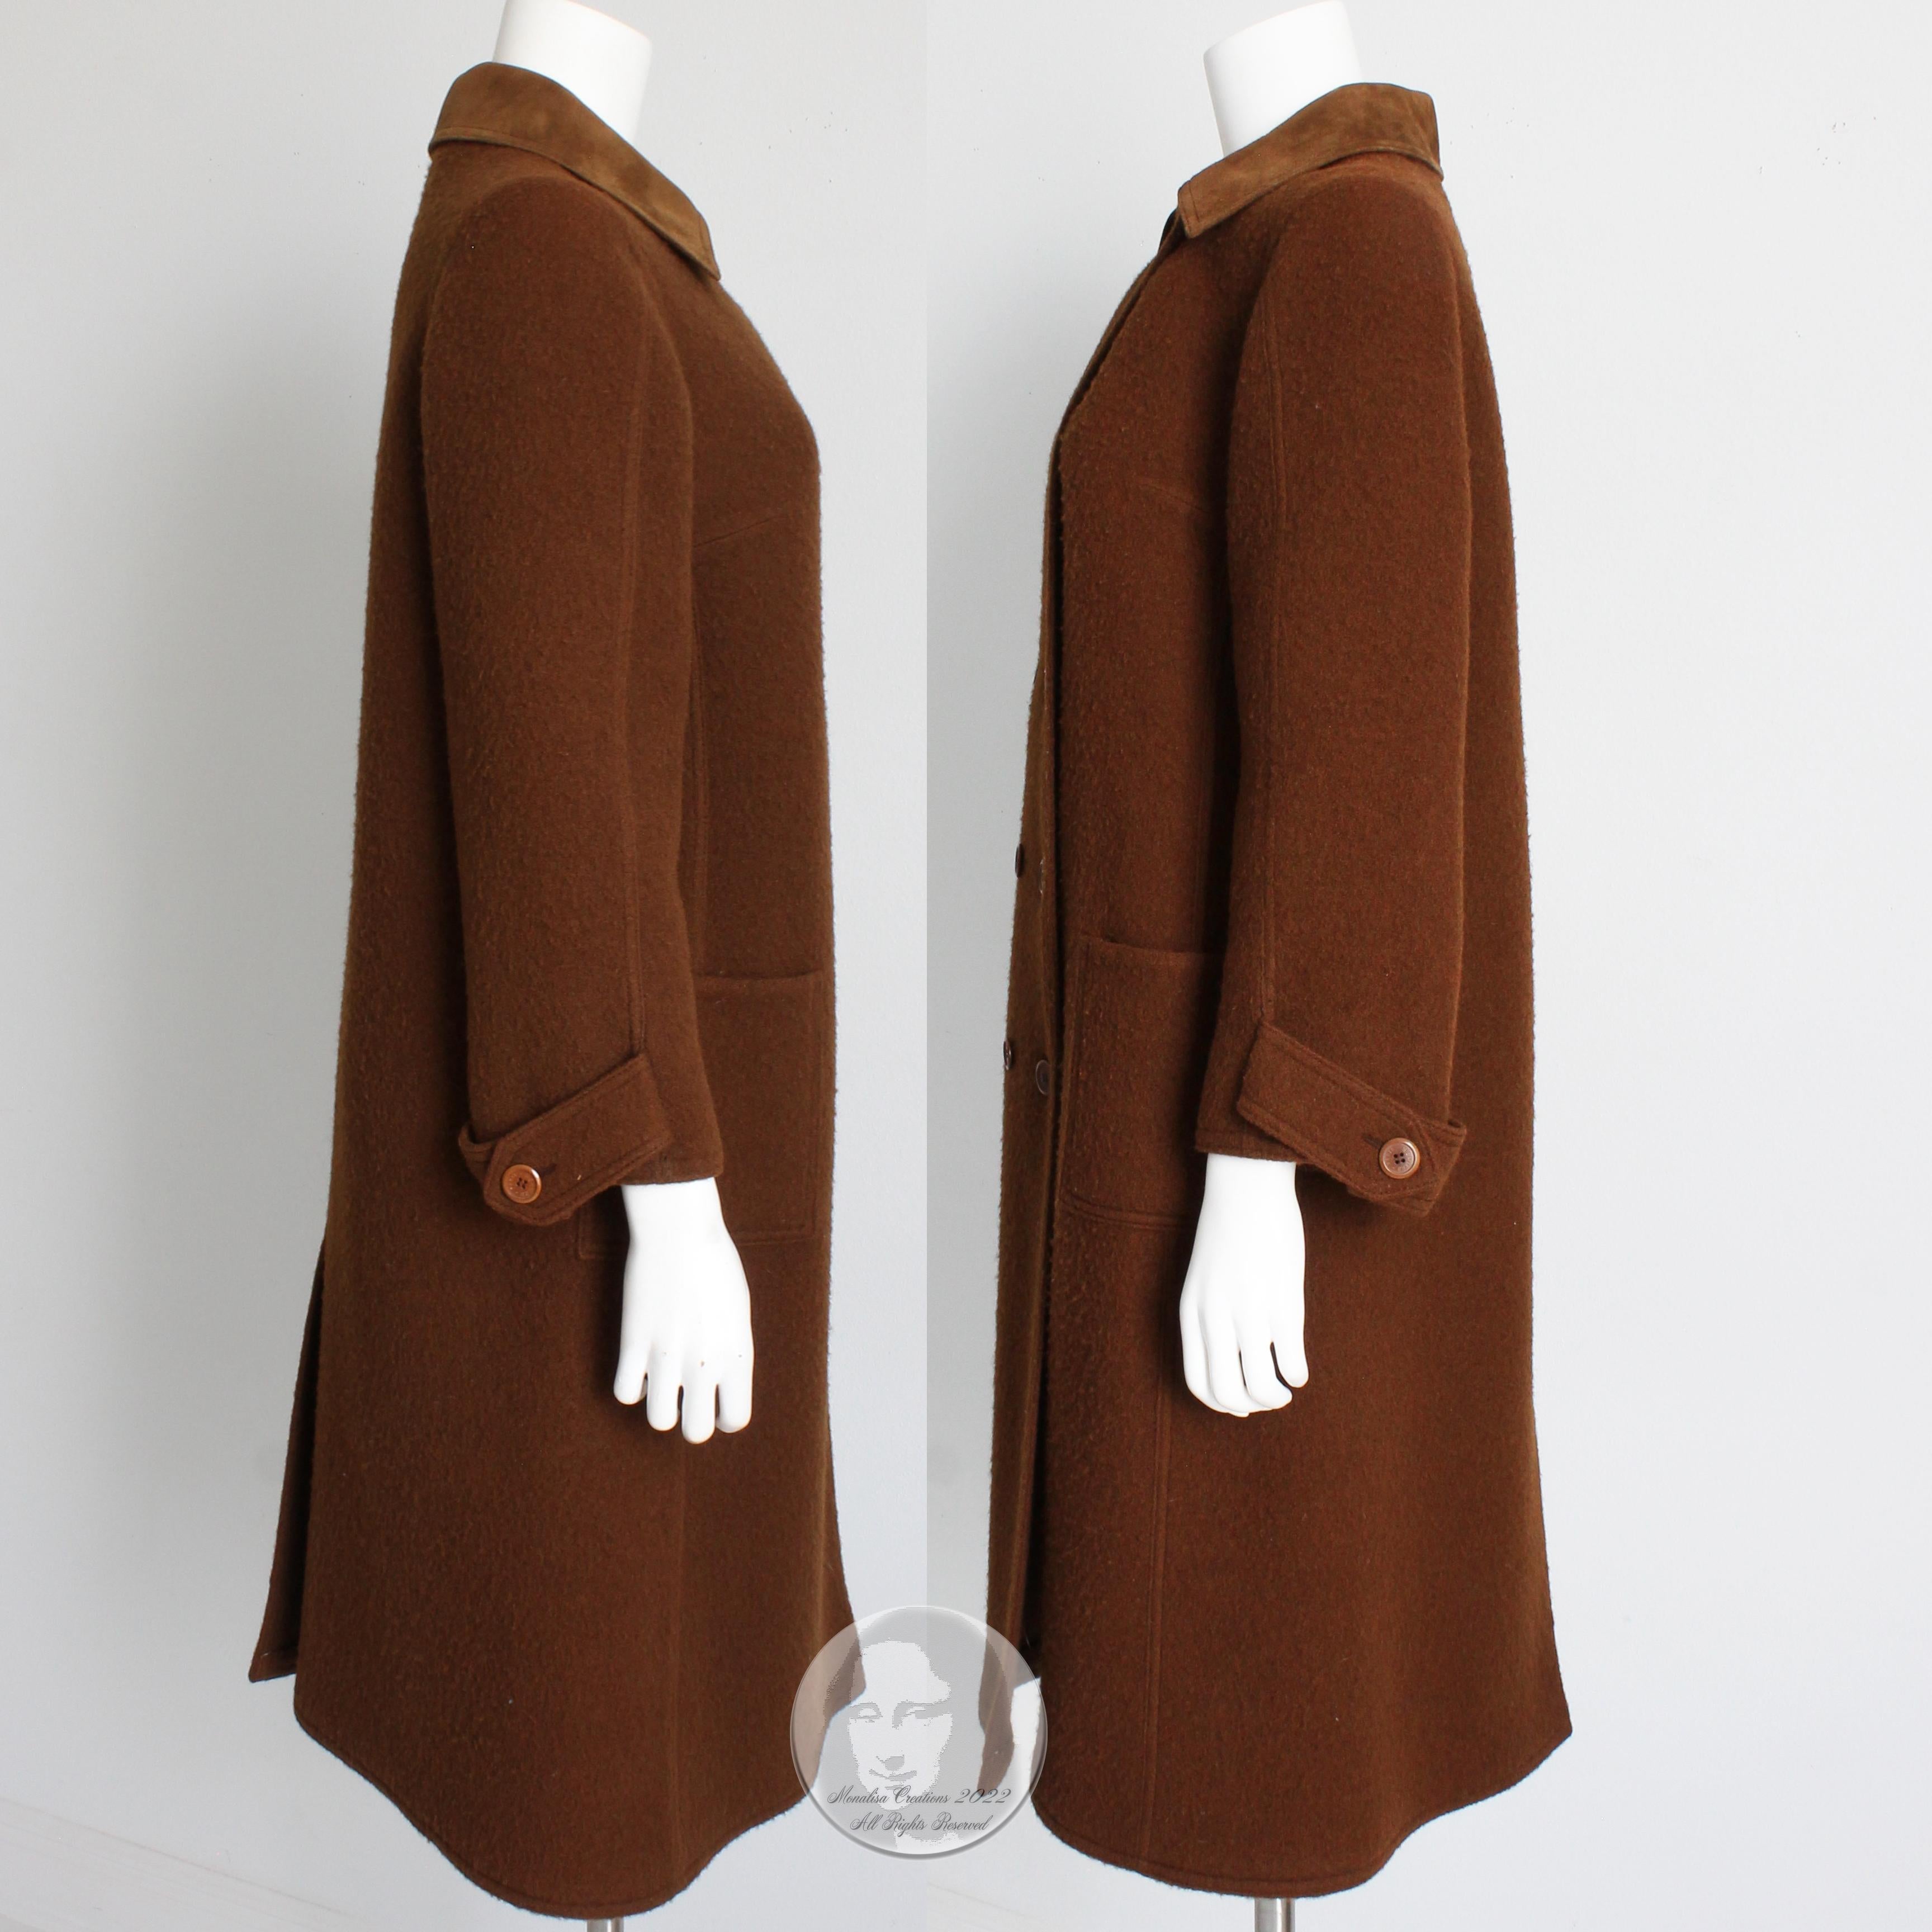 Hermes Brown Double Breasted Suede Leather Trim Trench Style Wool Coat, 1970s For Sale 4